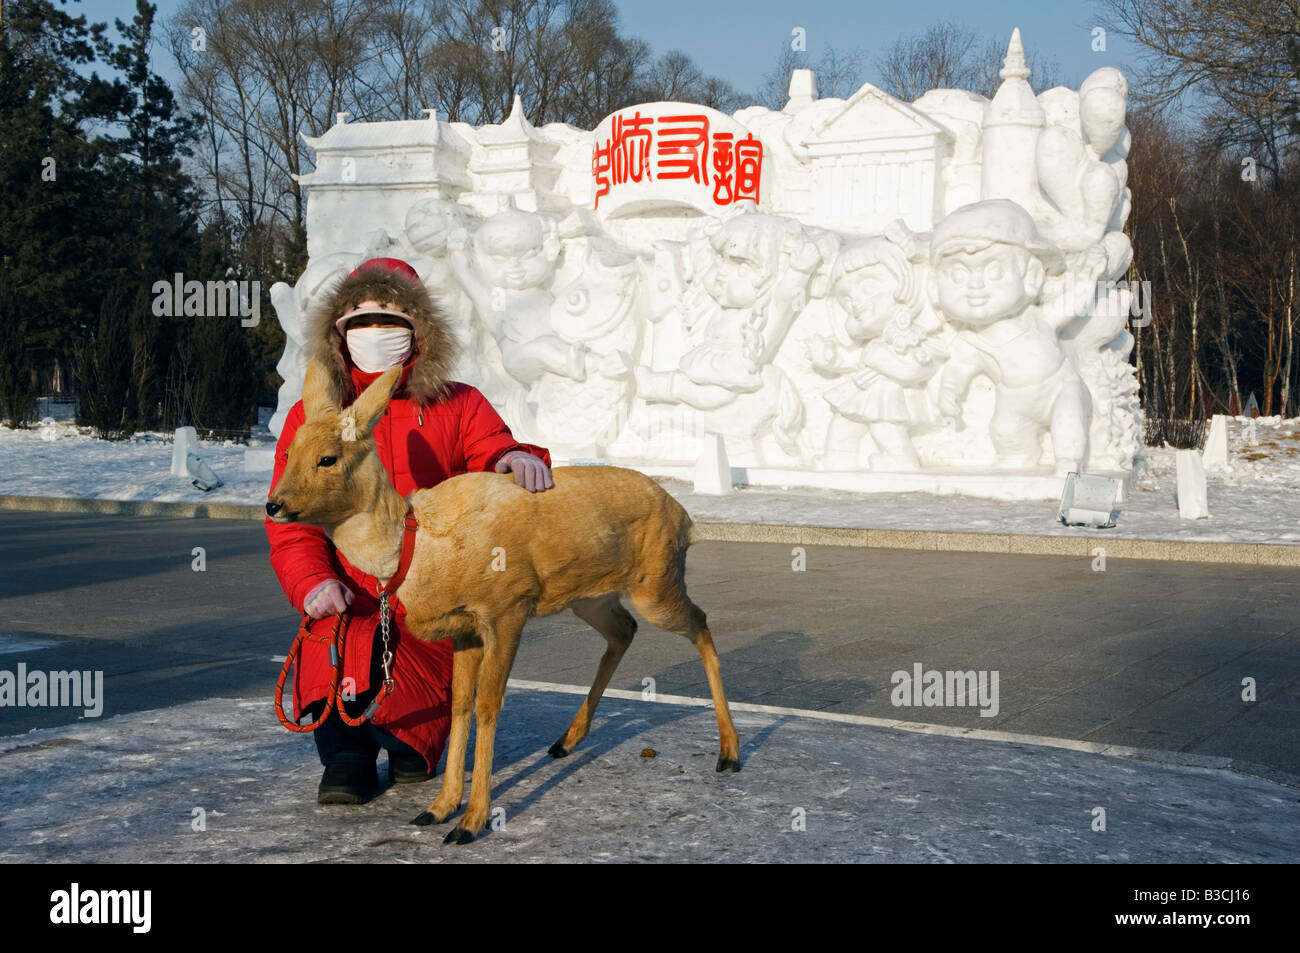 China, Northeast China, Heilongjiang Province, Harbin City. Snow and Ice Sculpture Festival at Sun Island Park. A woman with a young deer. Stock Photo